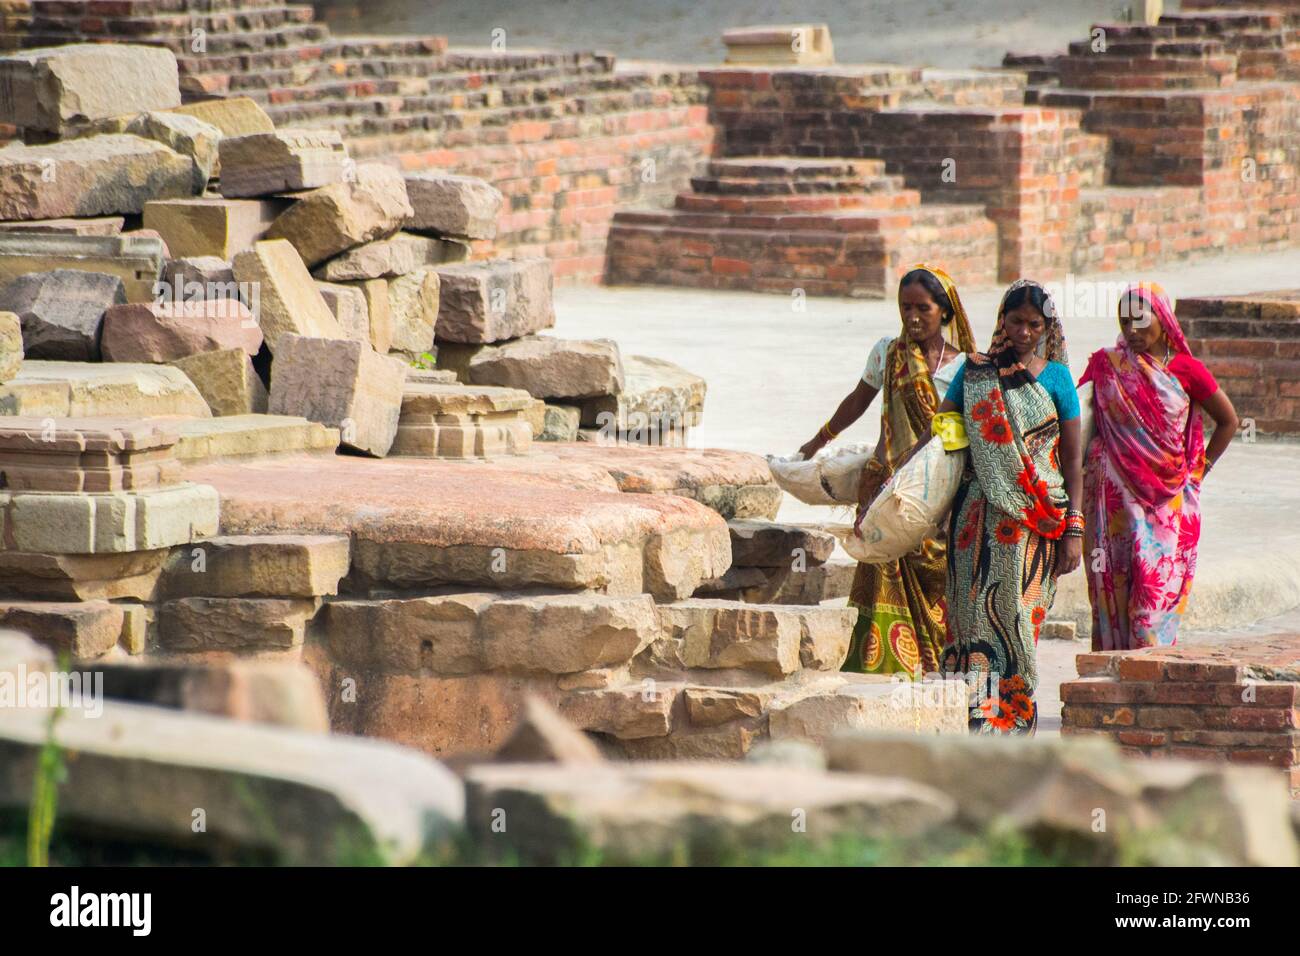 Sarnath, India. Workers carrying heavy loads. Stock Photo